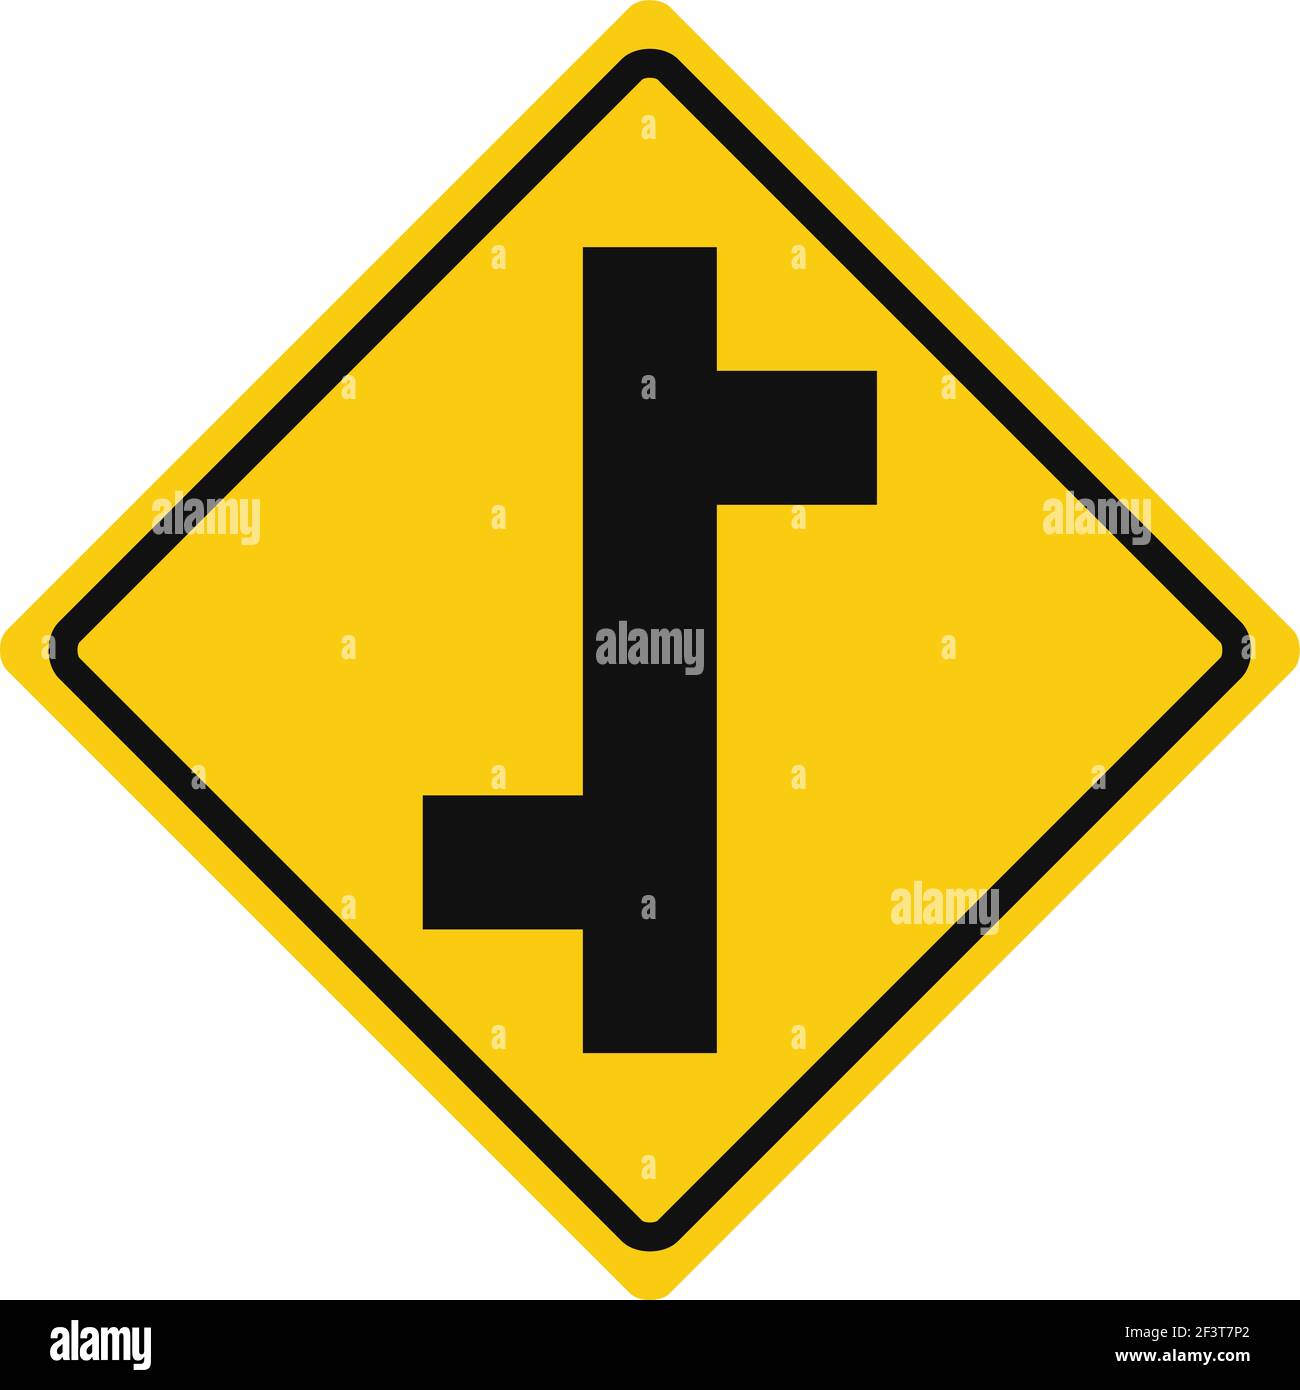 Rhomboid traffic signal in yellow and black, isolated on white background. Warning of side roads on left and right, consecutively Stock Vector